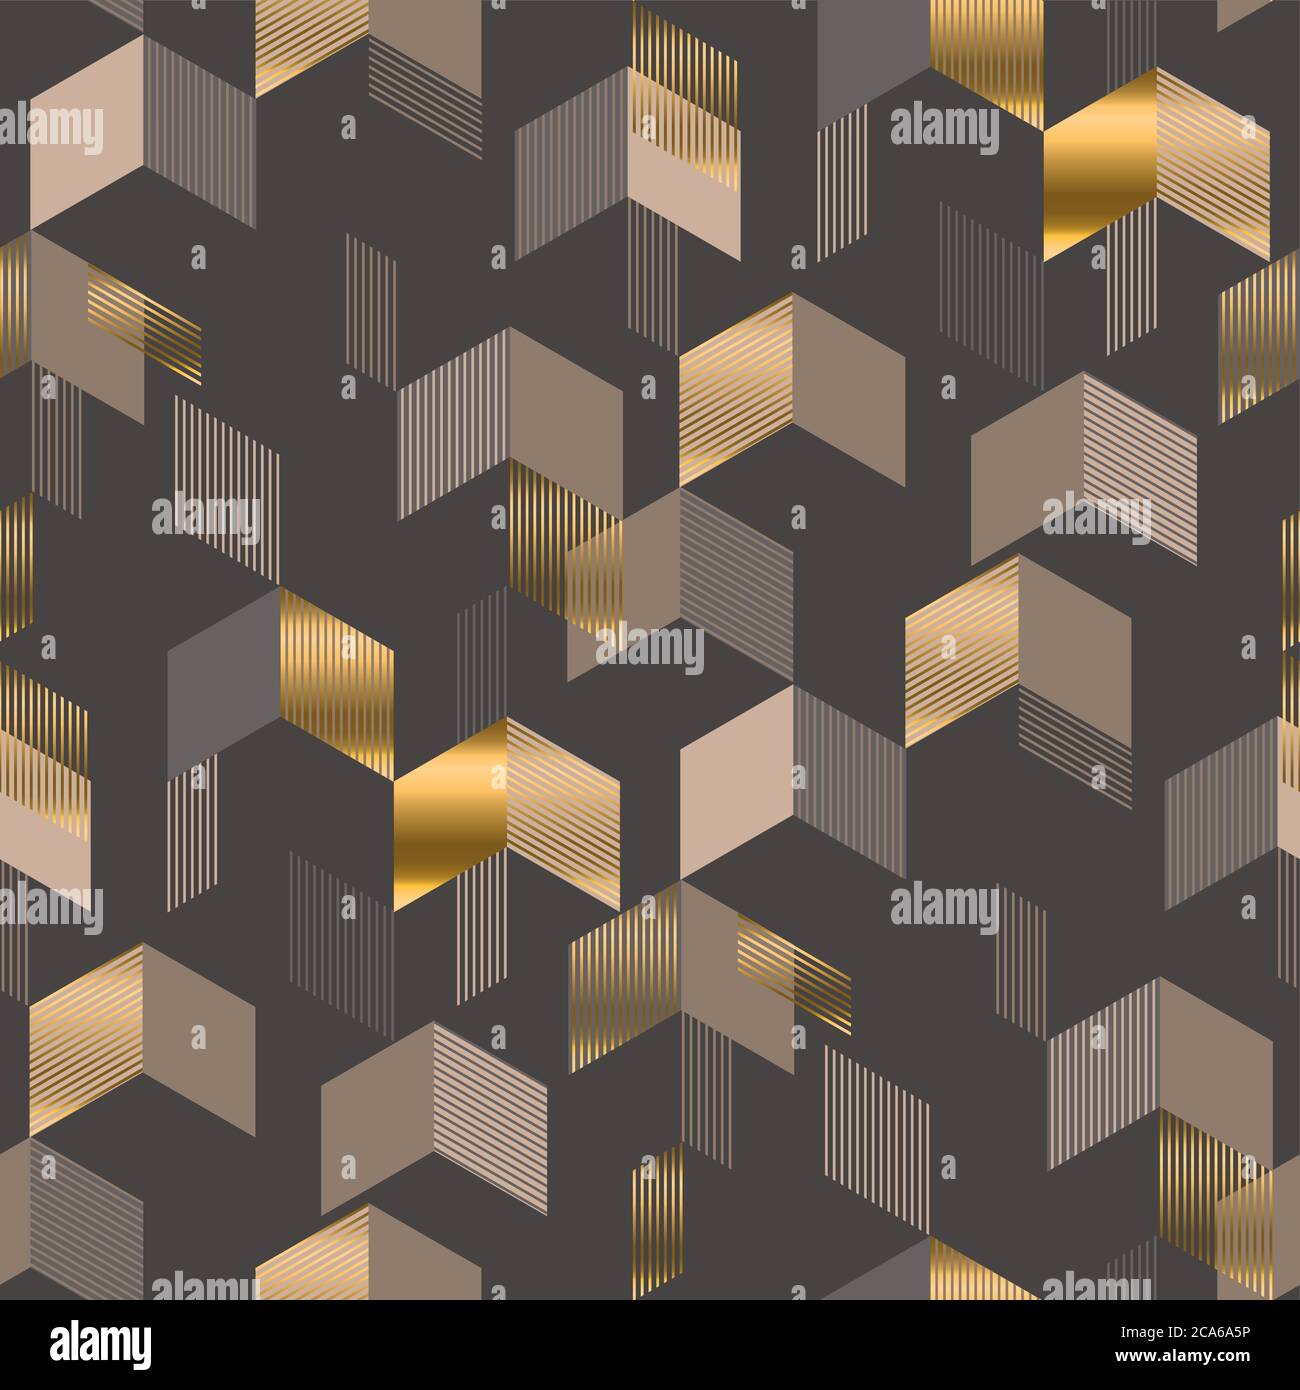 Dynamic luxury gold and beige abstract seamless pattern for background, fabric, textile, wrap, surface, web and print design. Decorative arrow geometr Stock Vector